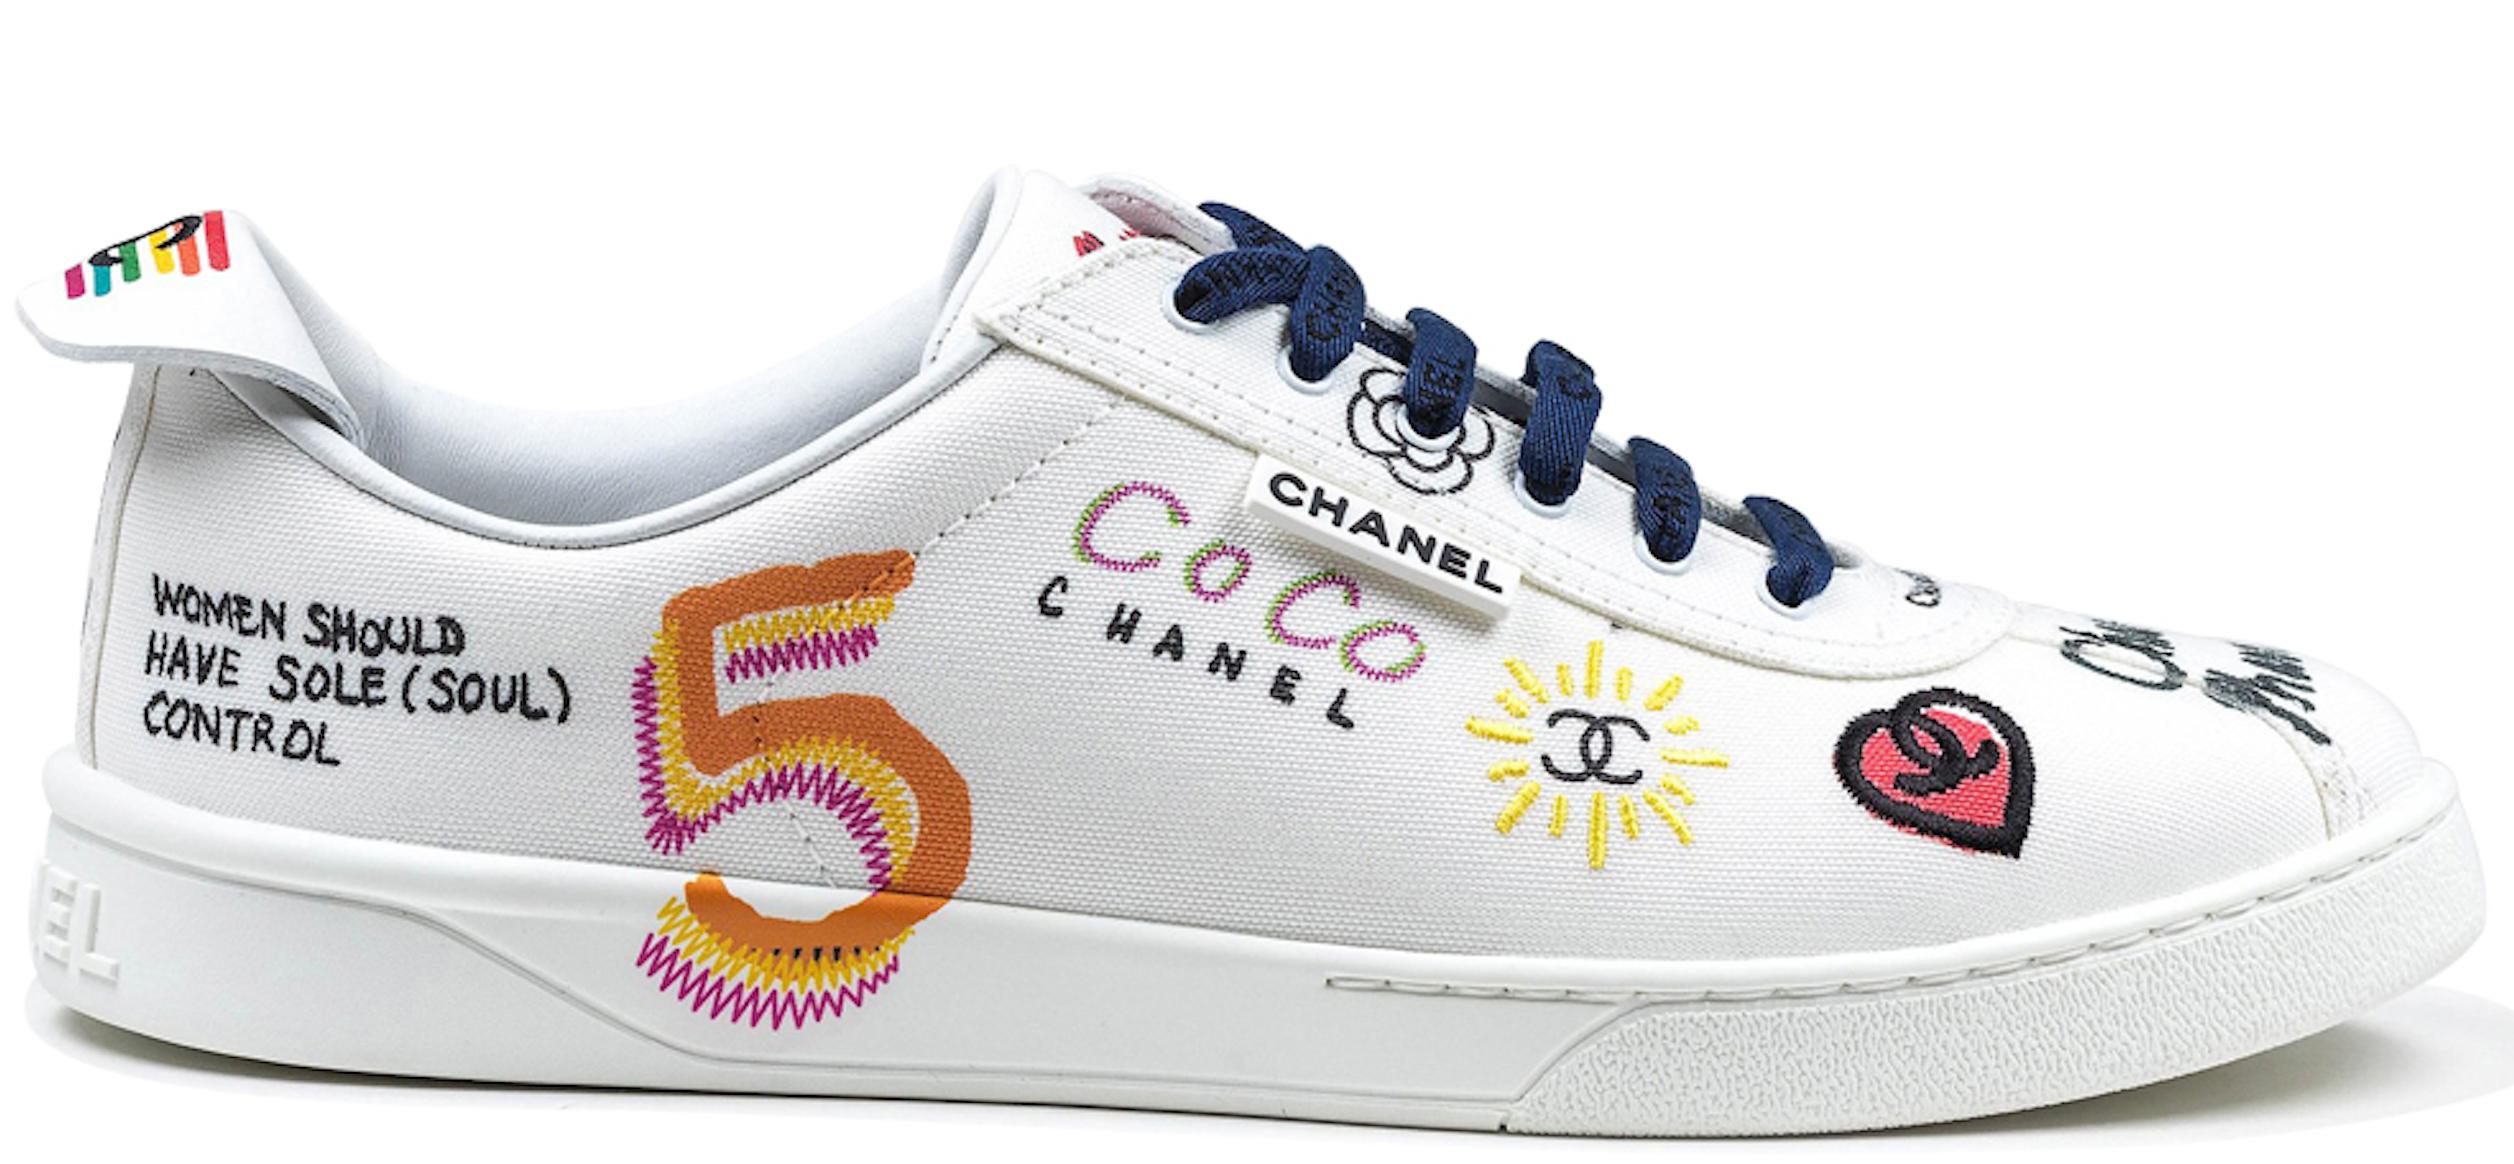 Buy Cheap Chanel shoes for Men's and women Chanel Sneakers